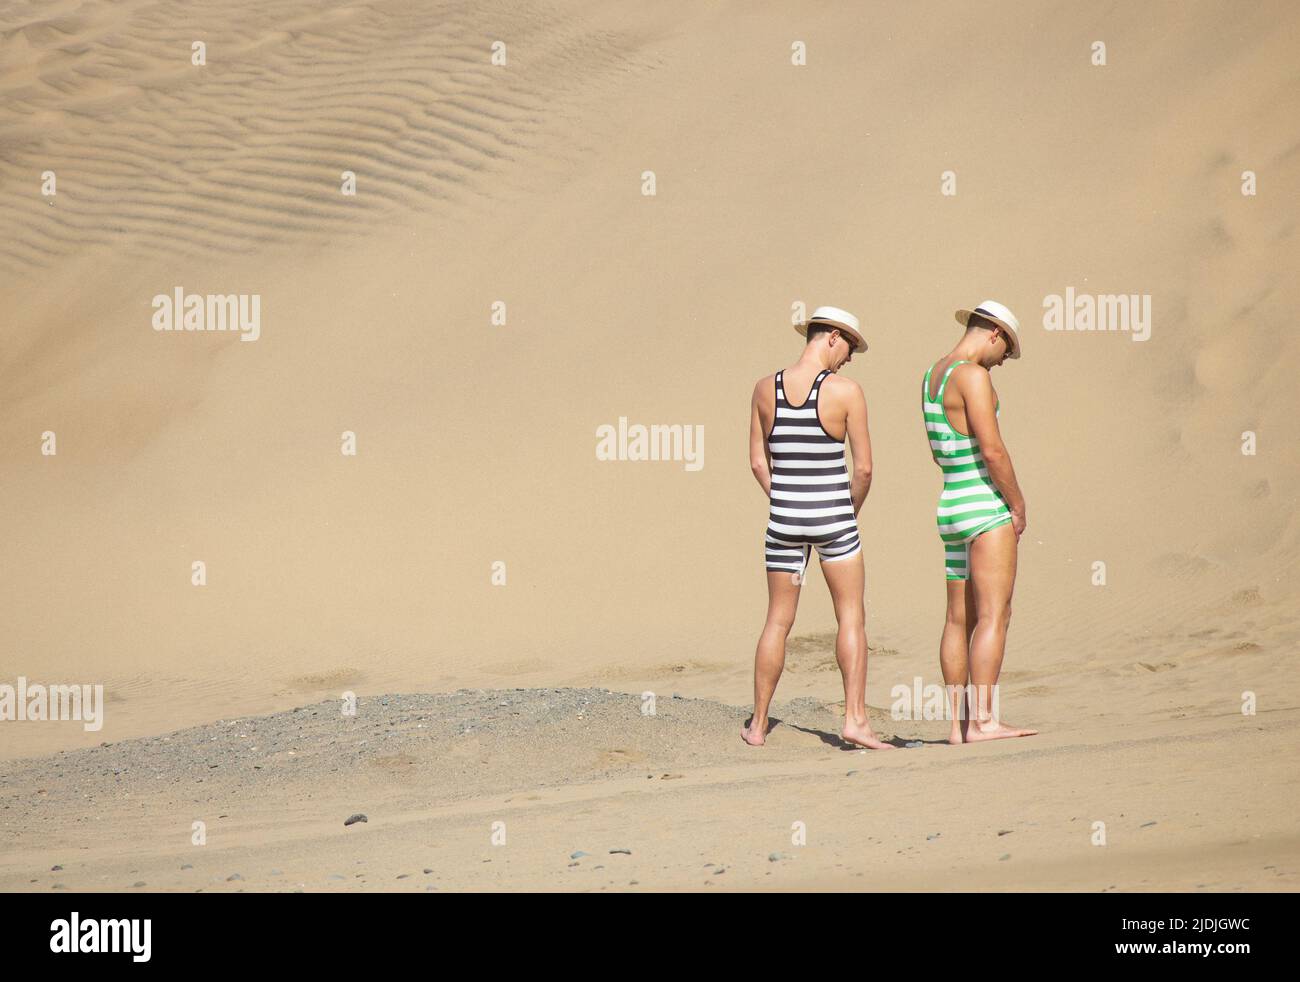 Men in fancy dress urinating, peeing, pissing on beach in Spain Stock Photo